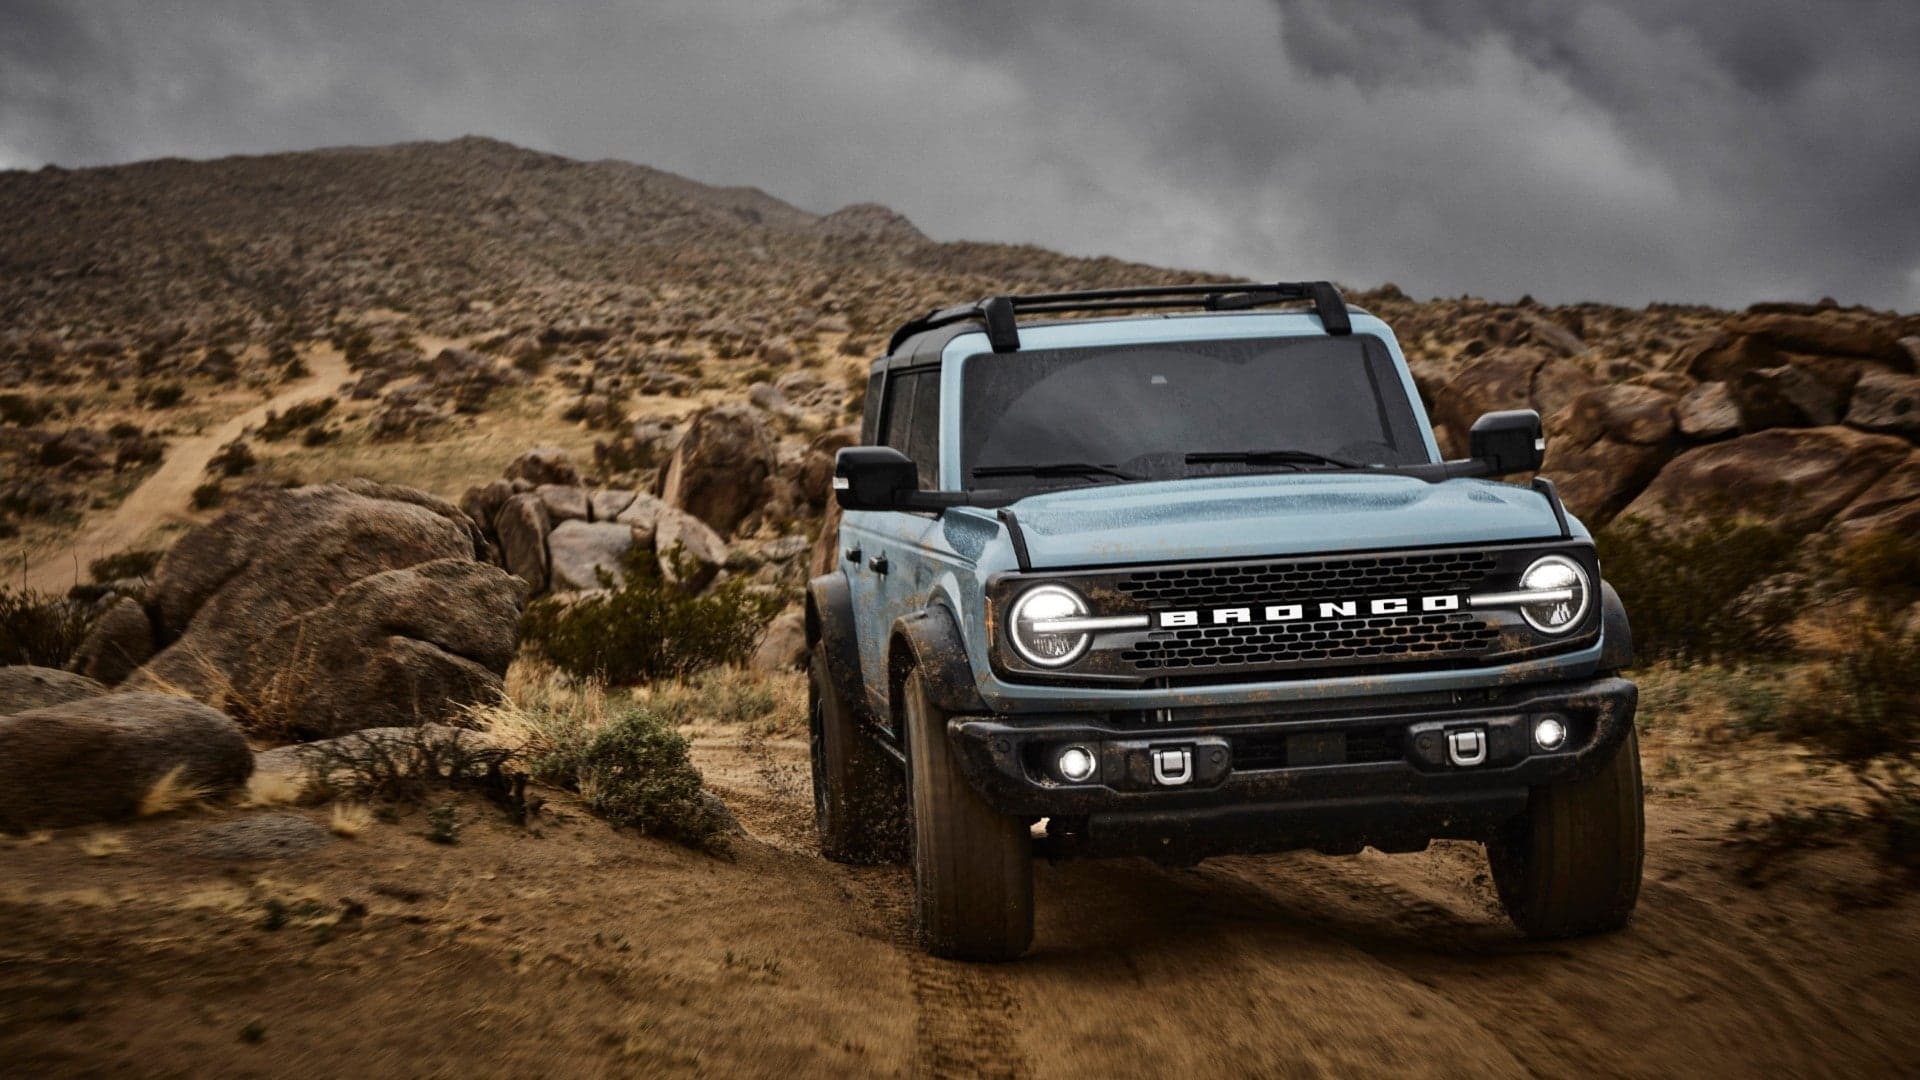 You Know a Ford Bronco Pickup Truck Is Probably Happening